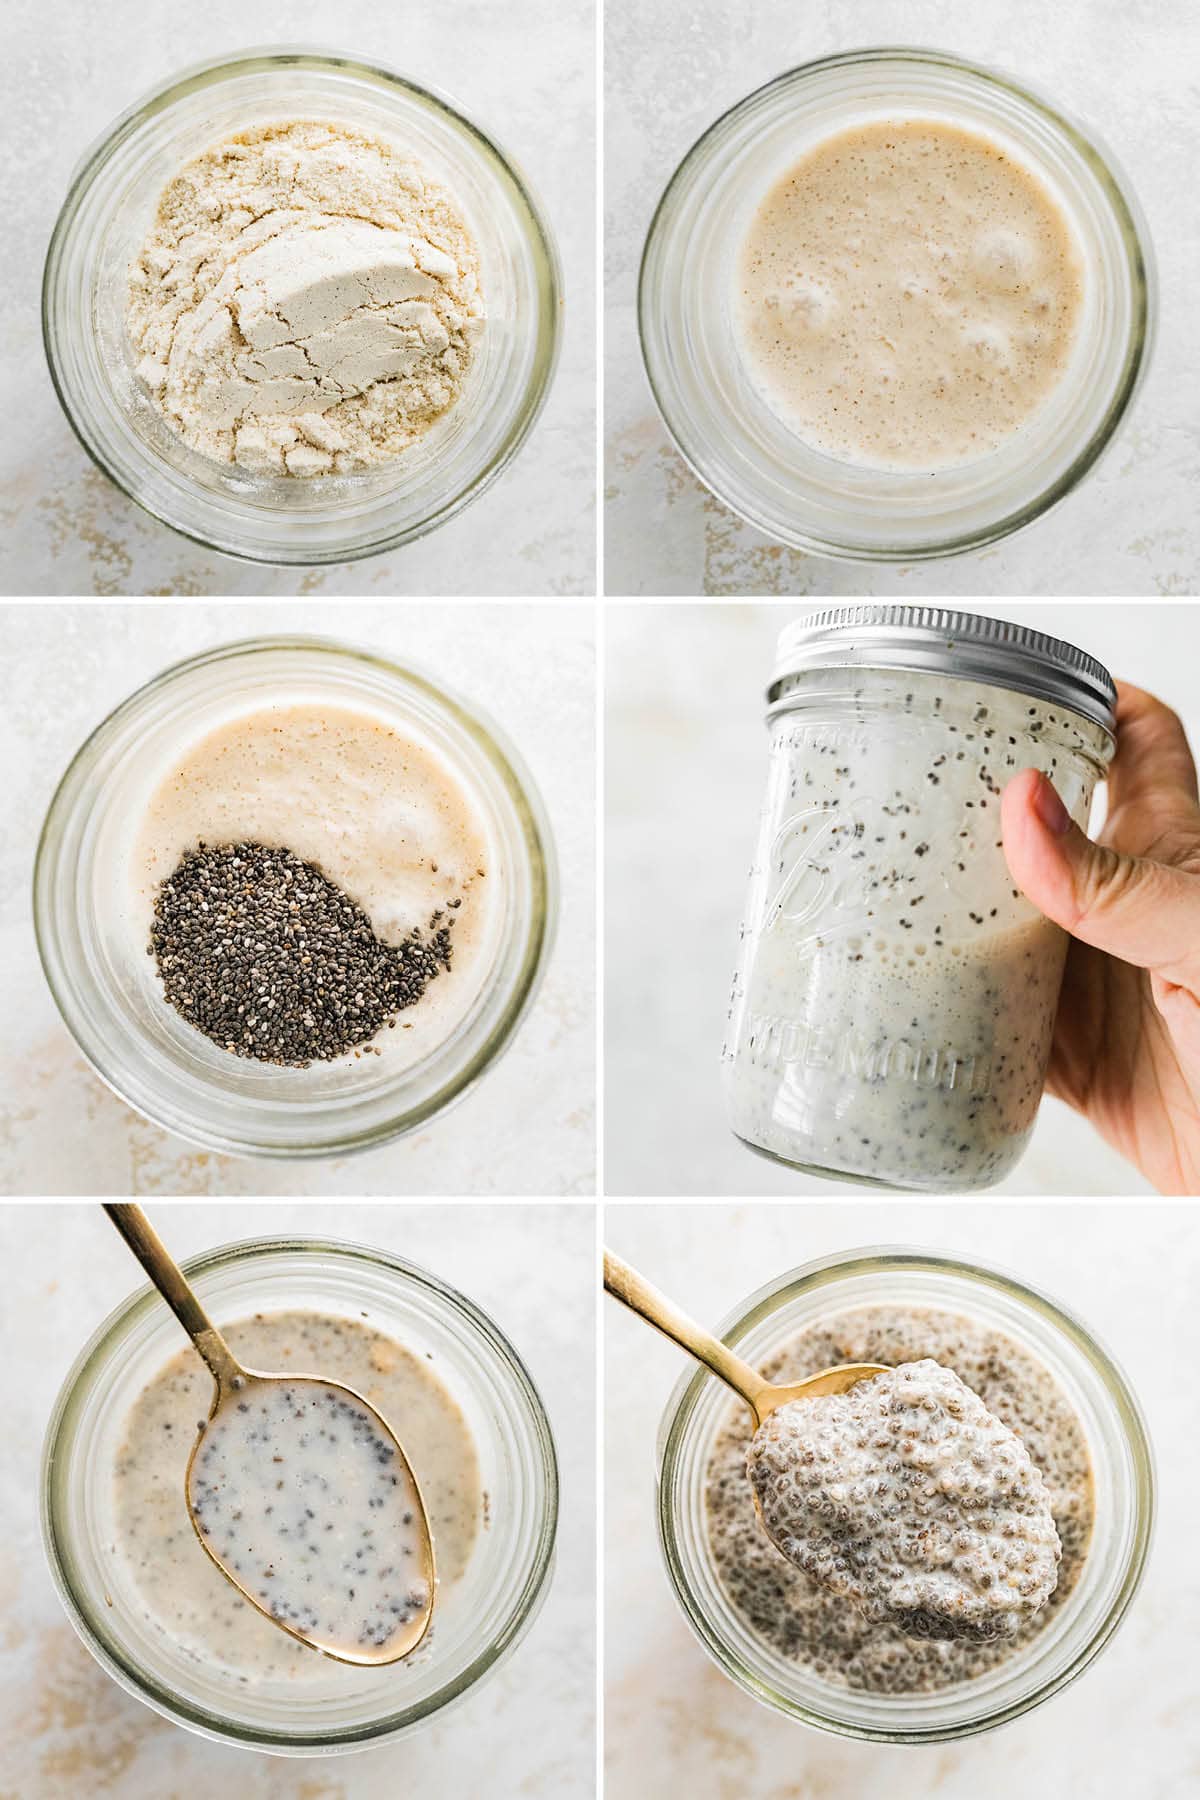 Six photos showing the steps to make Protein Chia Pudding: stirring the milk, protein powder and chia seeds together. Then two photos show how the chia seeds thicken up.